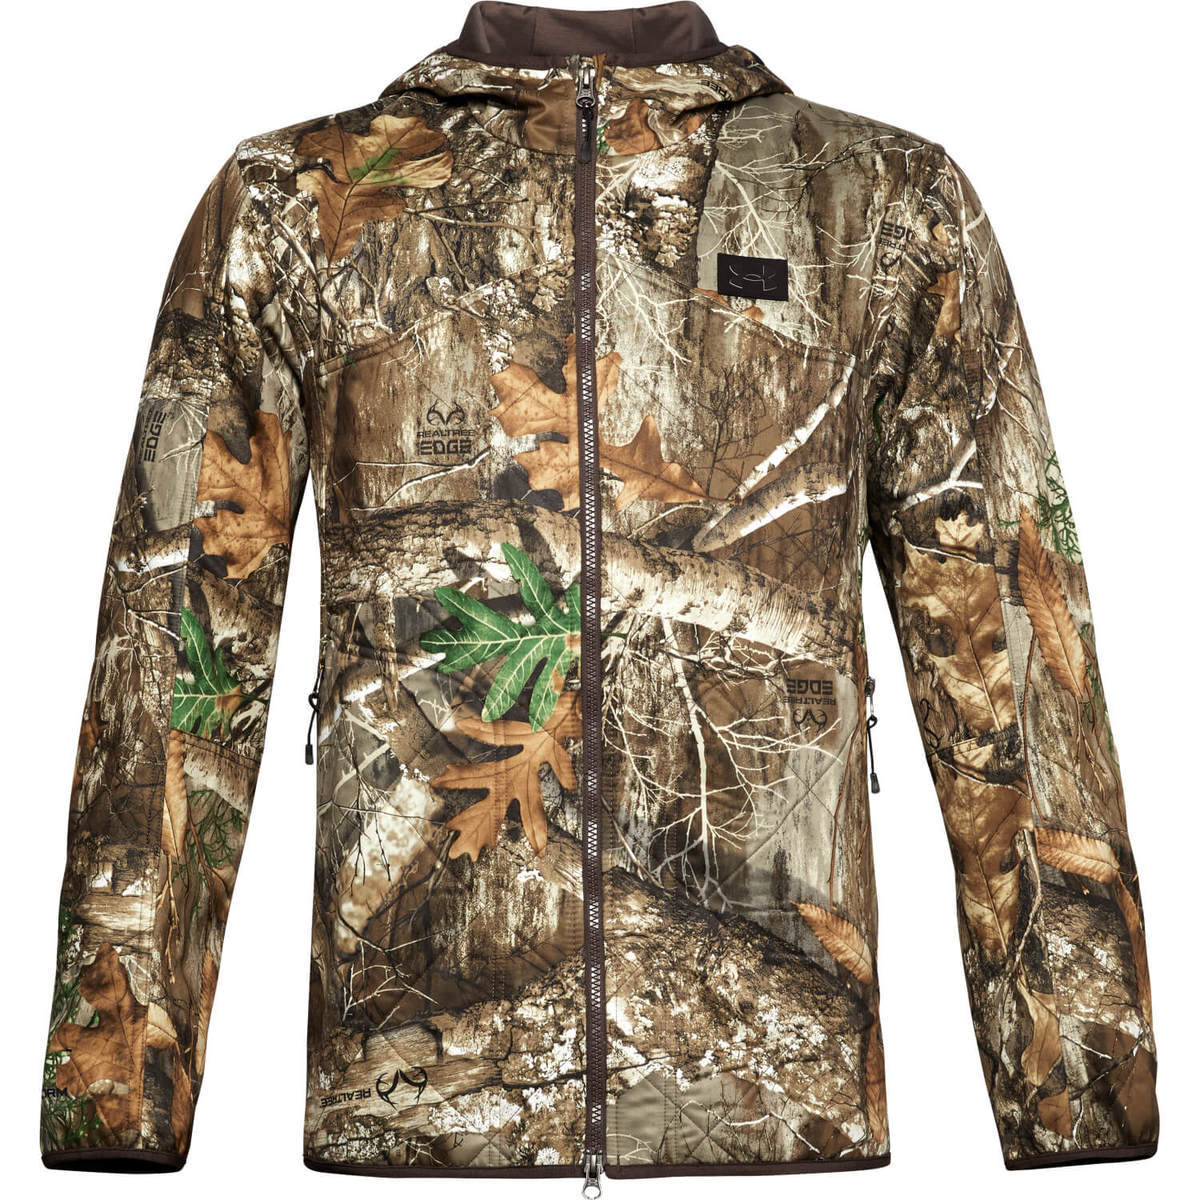 Under Armour Men's Brow Tine Hunting Jacket - Realtree Edge - M ...